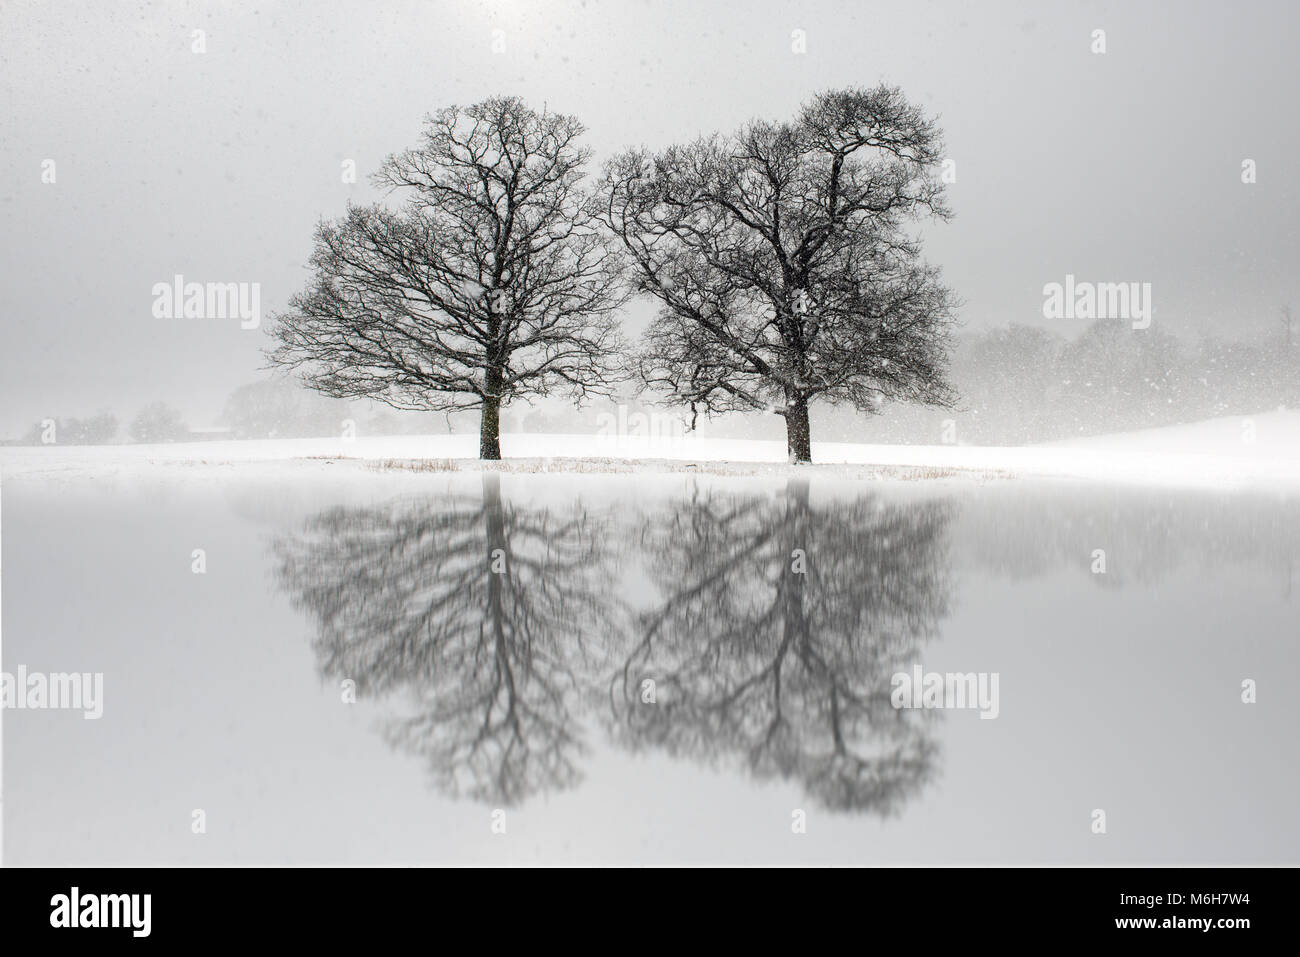 Two trees in a snow covered field with reflections in a lake Stock Photo